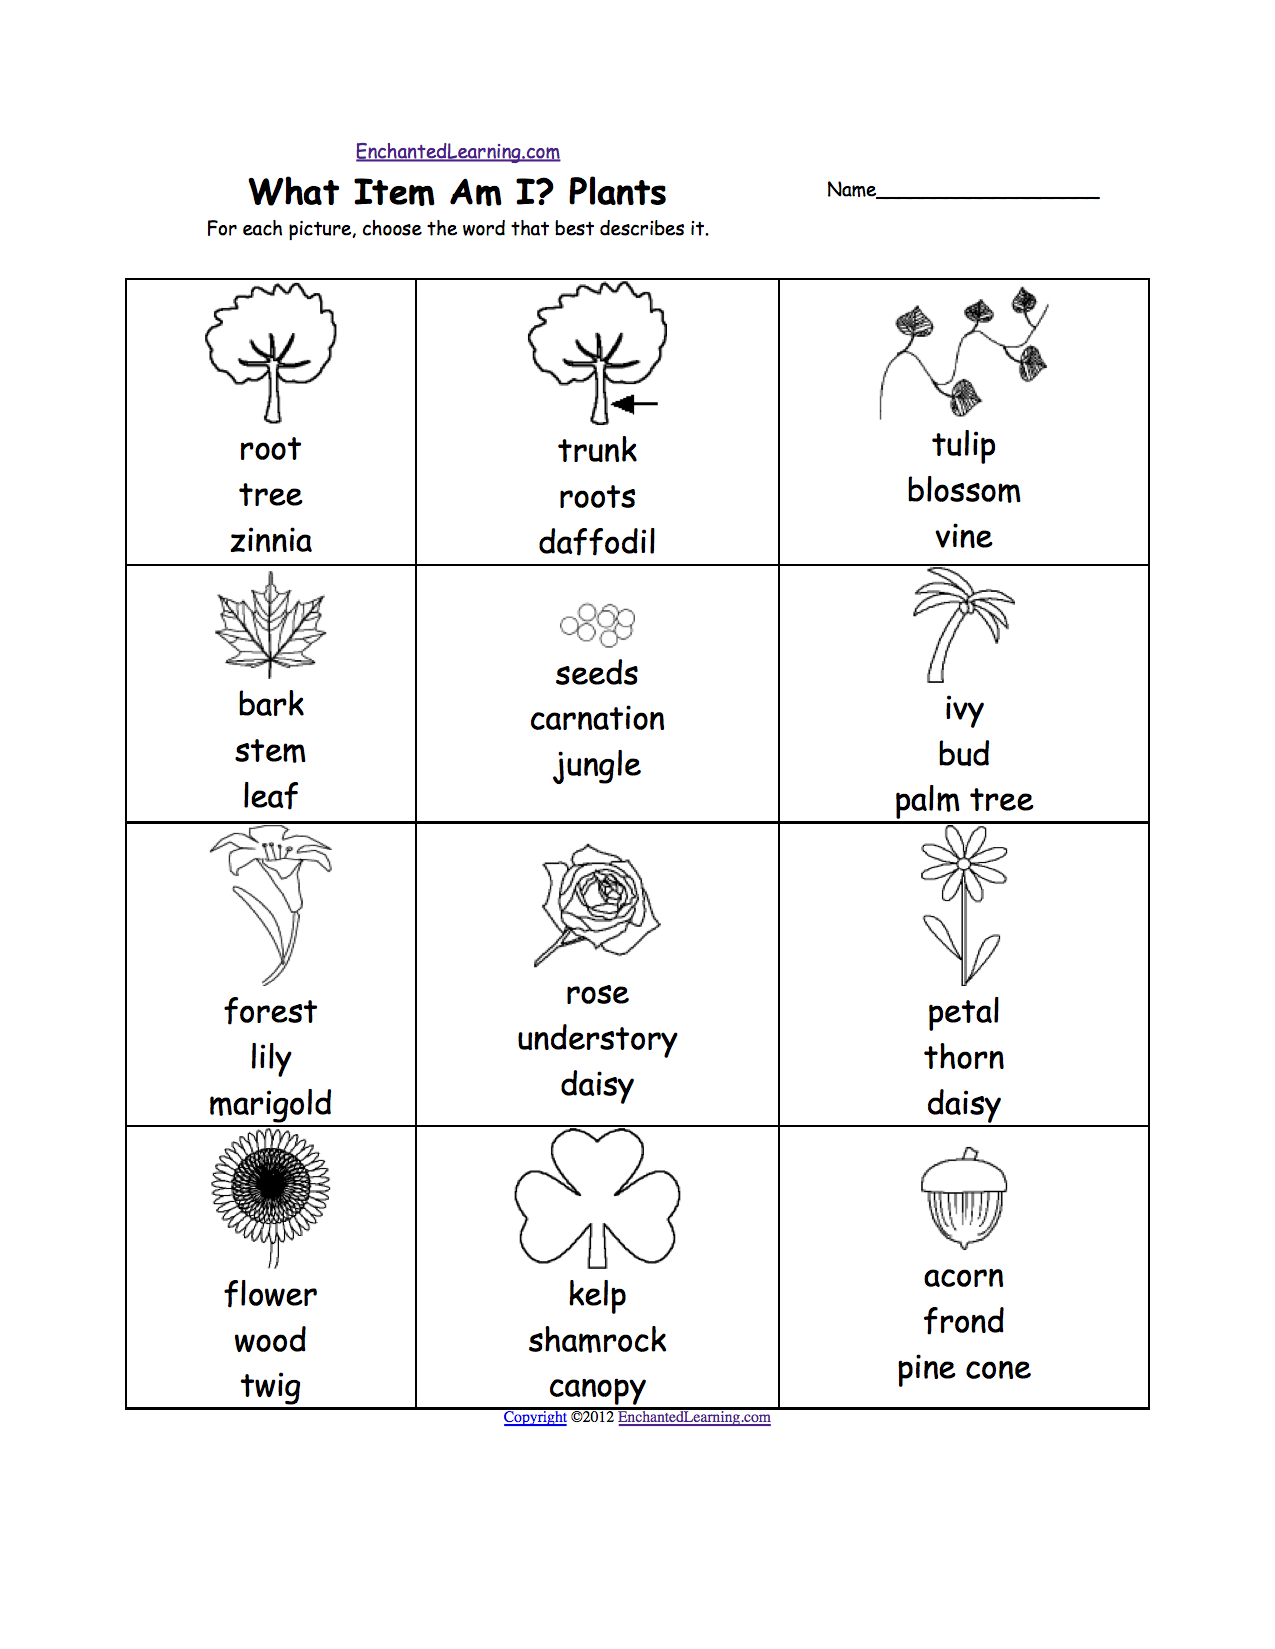 Plants At Enchantedlearning Together With Comparing Plants Worksheet